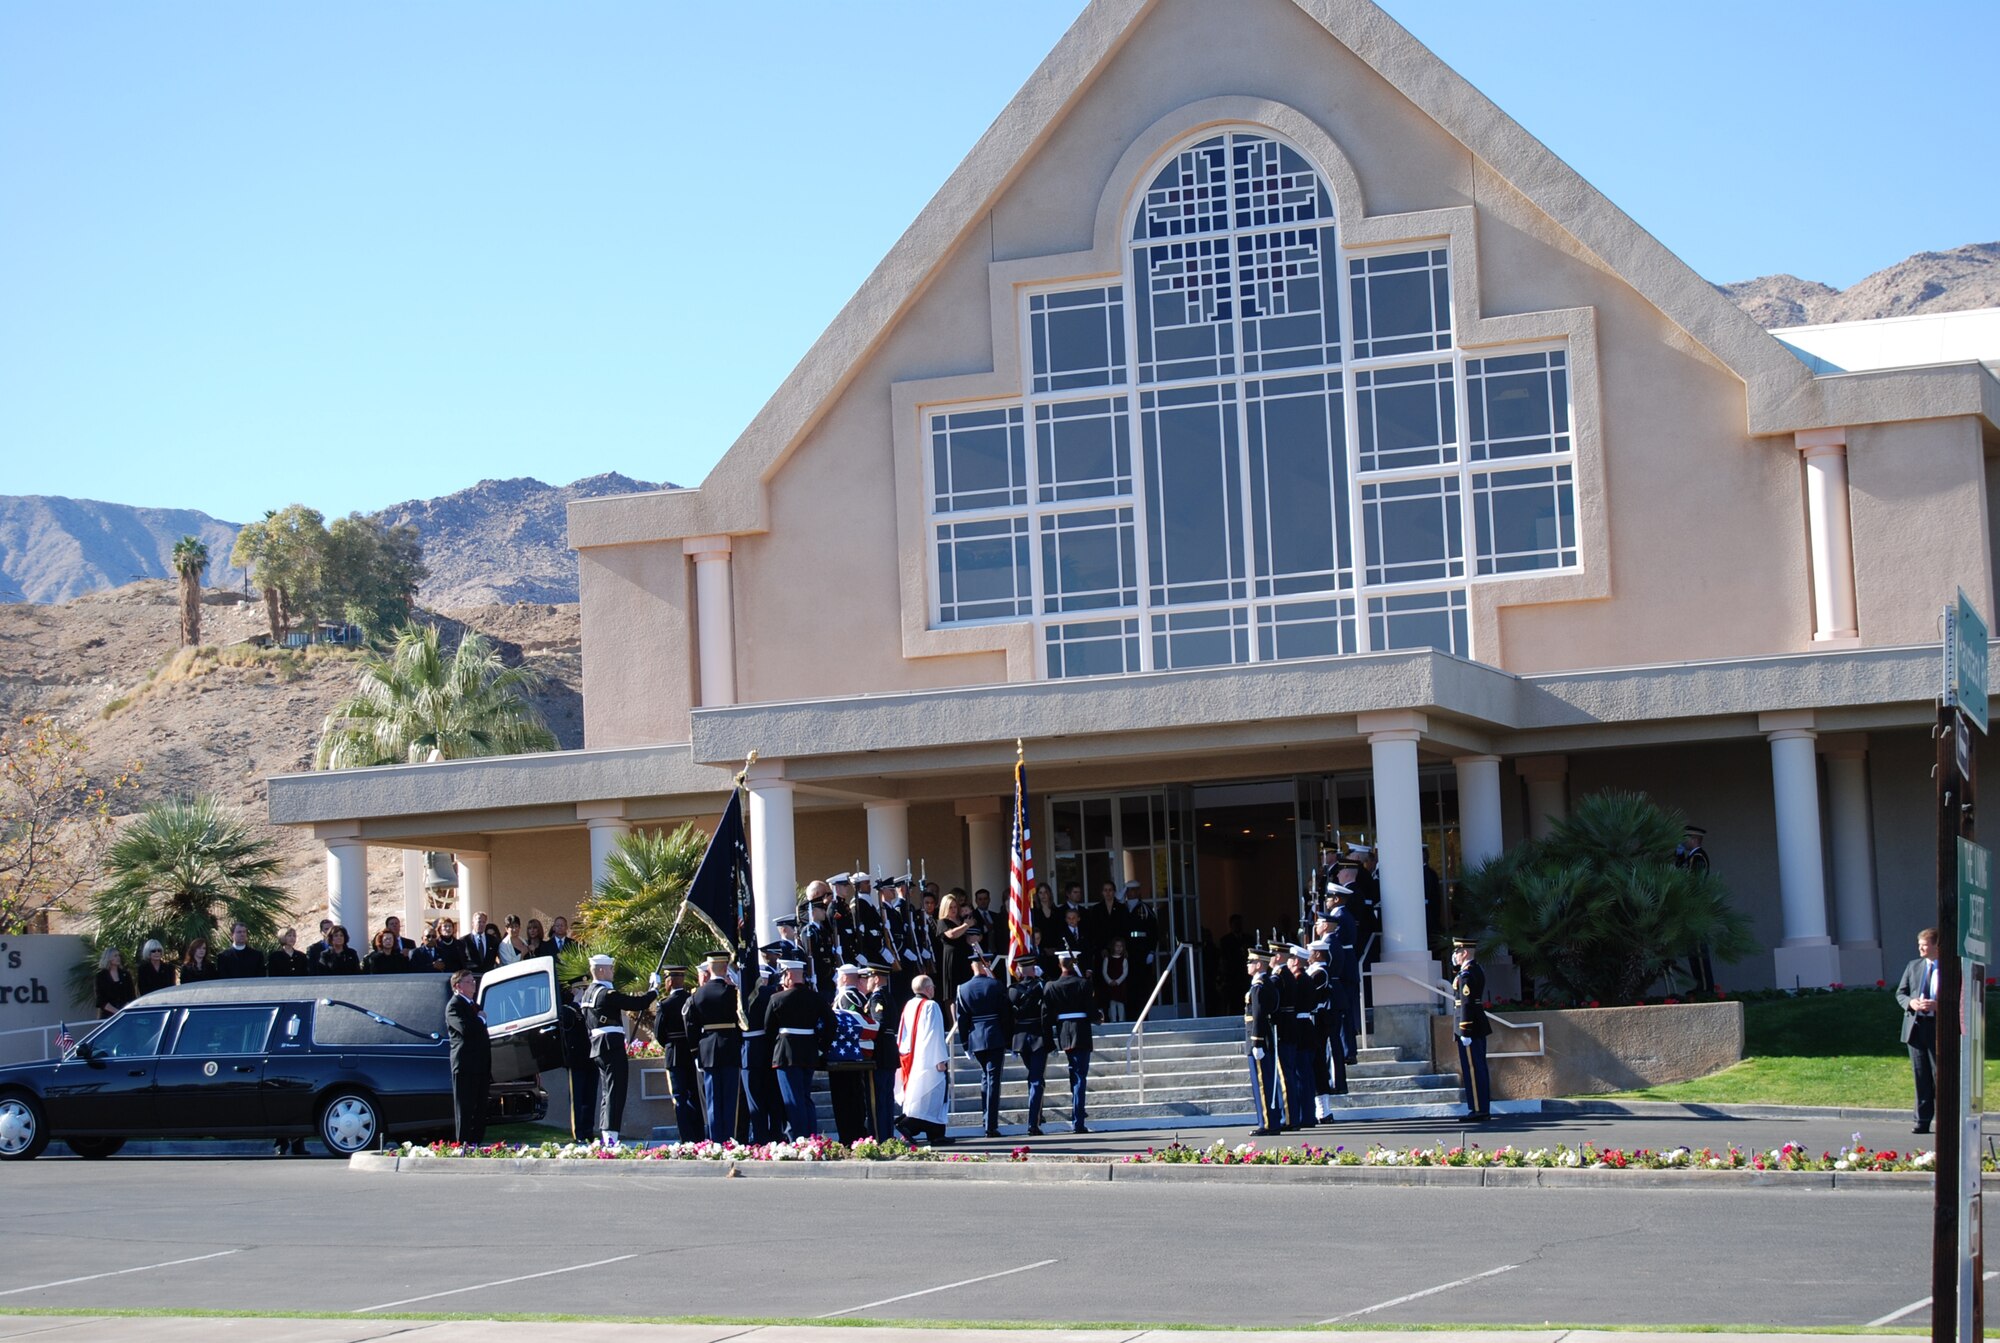 The casket of the former President Gerald R. Ford is carried between the ranks of honorary pallbearers and honor cordon into St. Margaret's Episcopal Church in Palm Springs, California, Dec. 29 for a private family prayer service. More than 500 military members are in Palm Desert supporting the California portion of the State Funeral for the former president. The military is providing ceremonial, logistics, and security support to honor and pay tribute to the former Commander-in-Chief and the Ford family. Ford died in Palm Desert, California, Dec. 26 at the age of 93. (U.S. Air Force Photo/1st Lt Carrie L. Kessler)